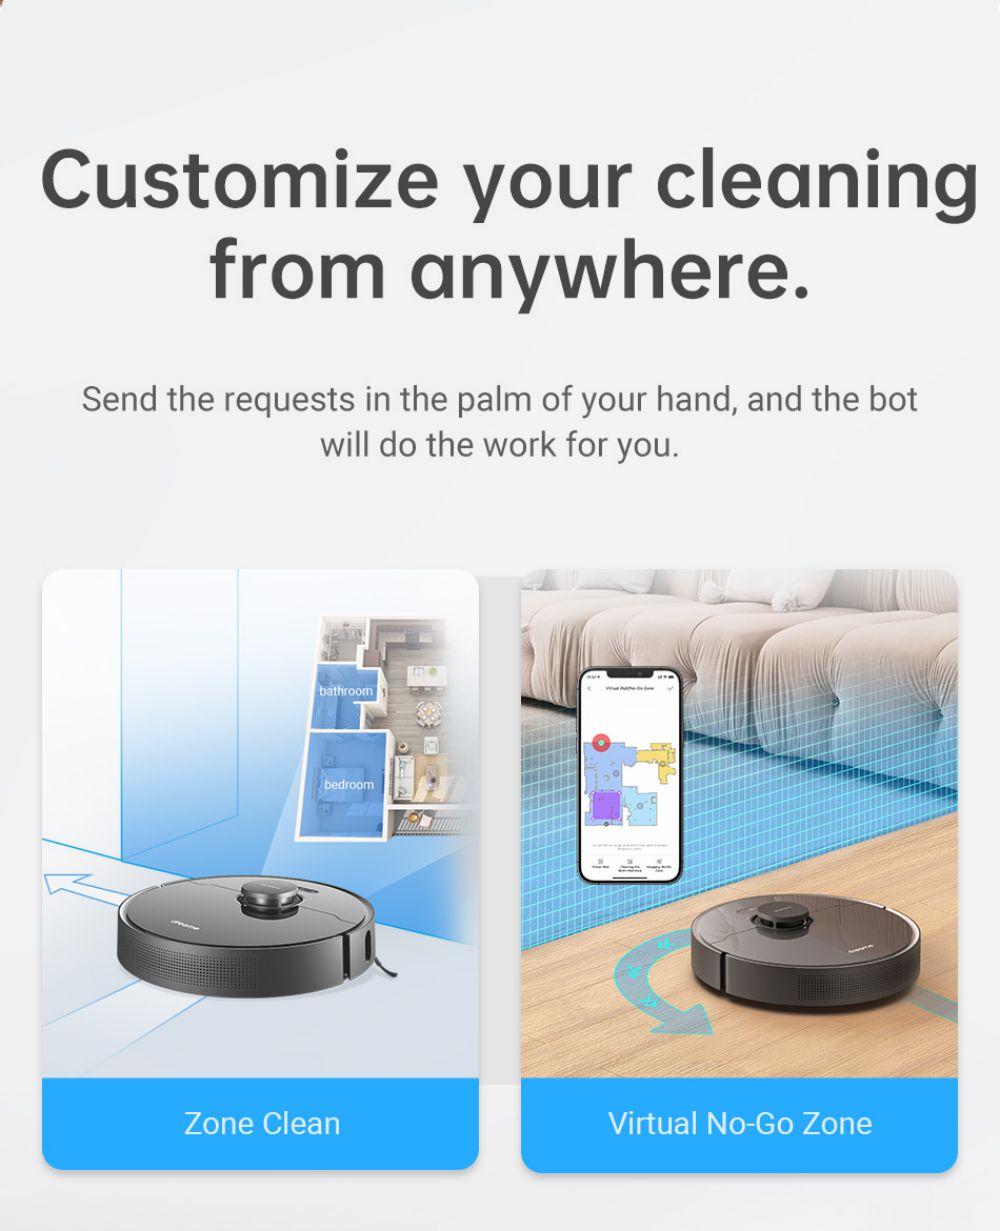 Dreame Bot Z10 Pro Robot Vacuum Cleaner 4000Pa Suction LDS and Line Laser Obstacle Avoidance 4000ml Dust Bag 150 Minutes Running Time for Carpets, Tiles, Hard Floors - Black